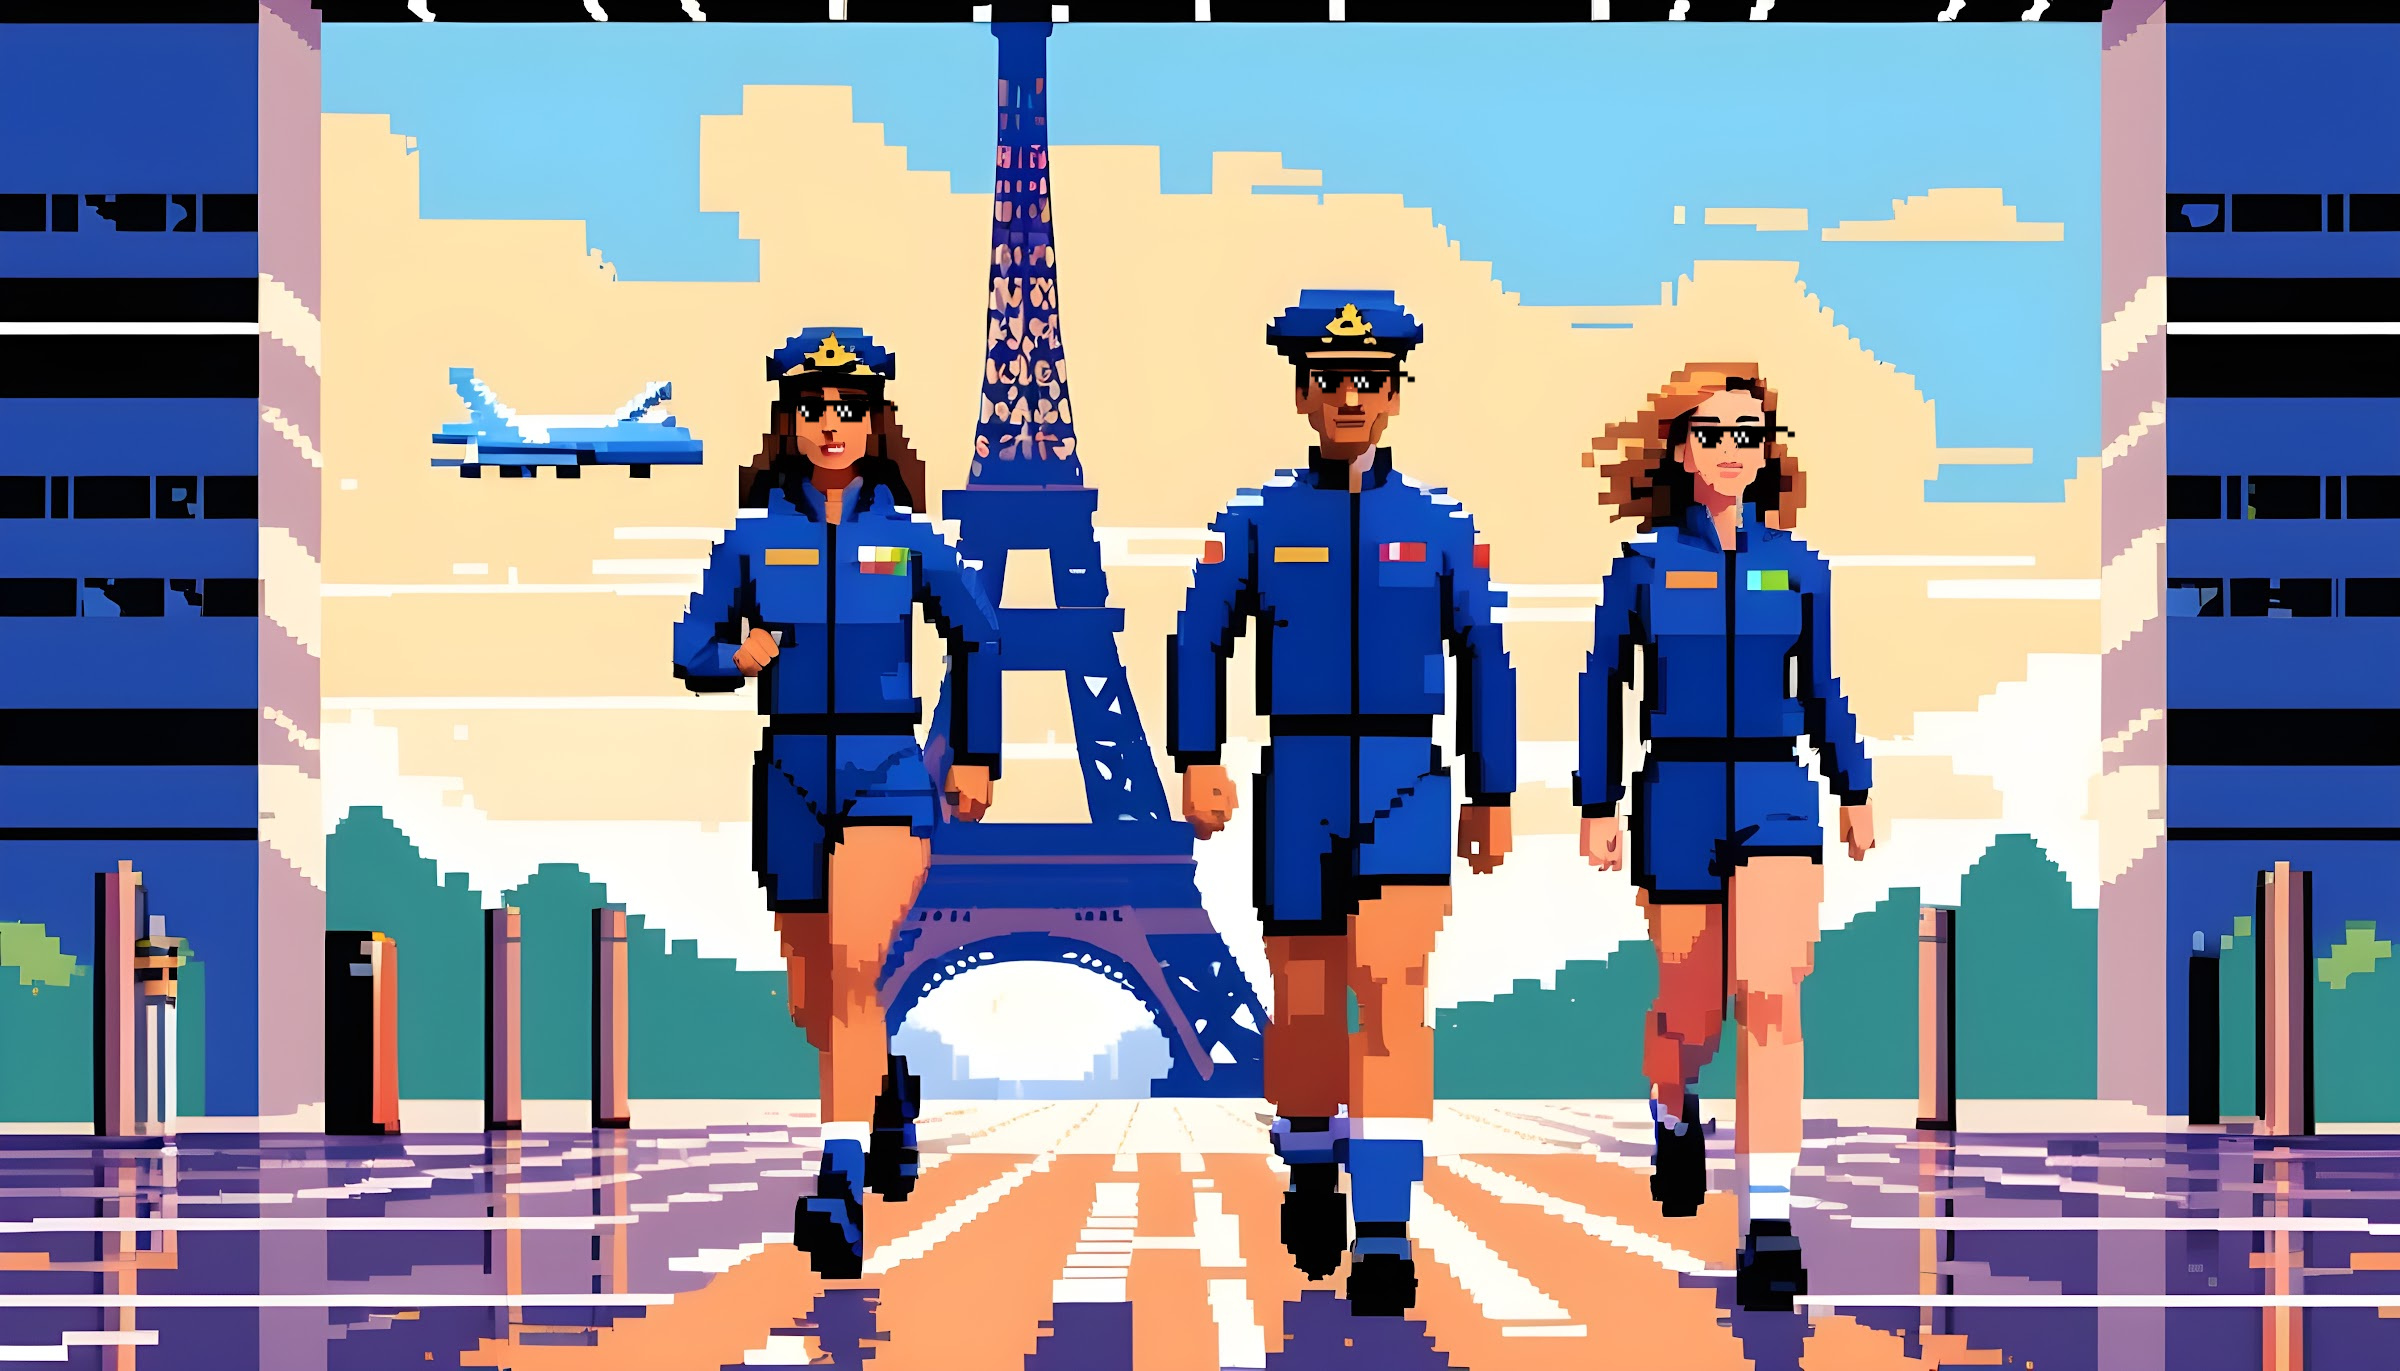 Ops to Paris for the Olympics